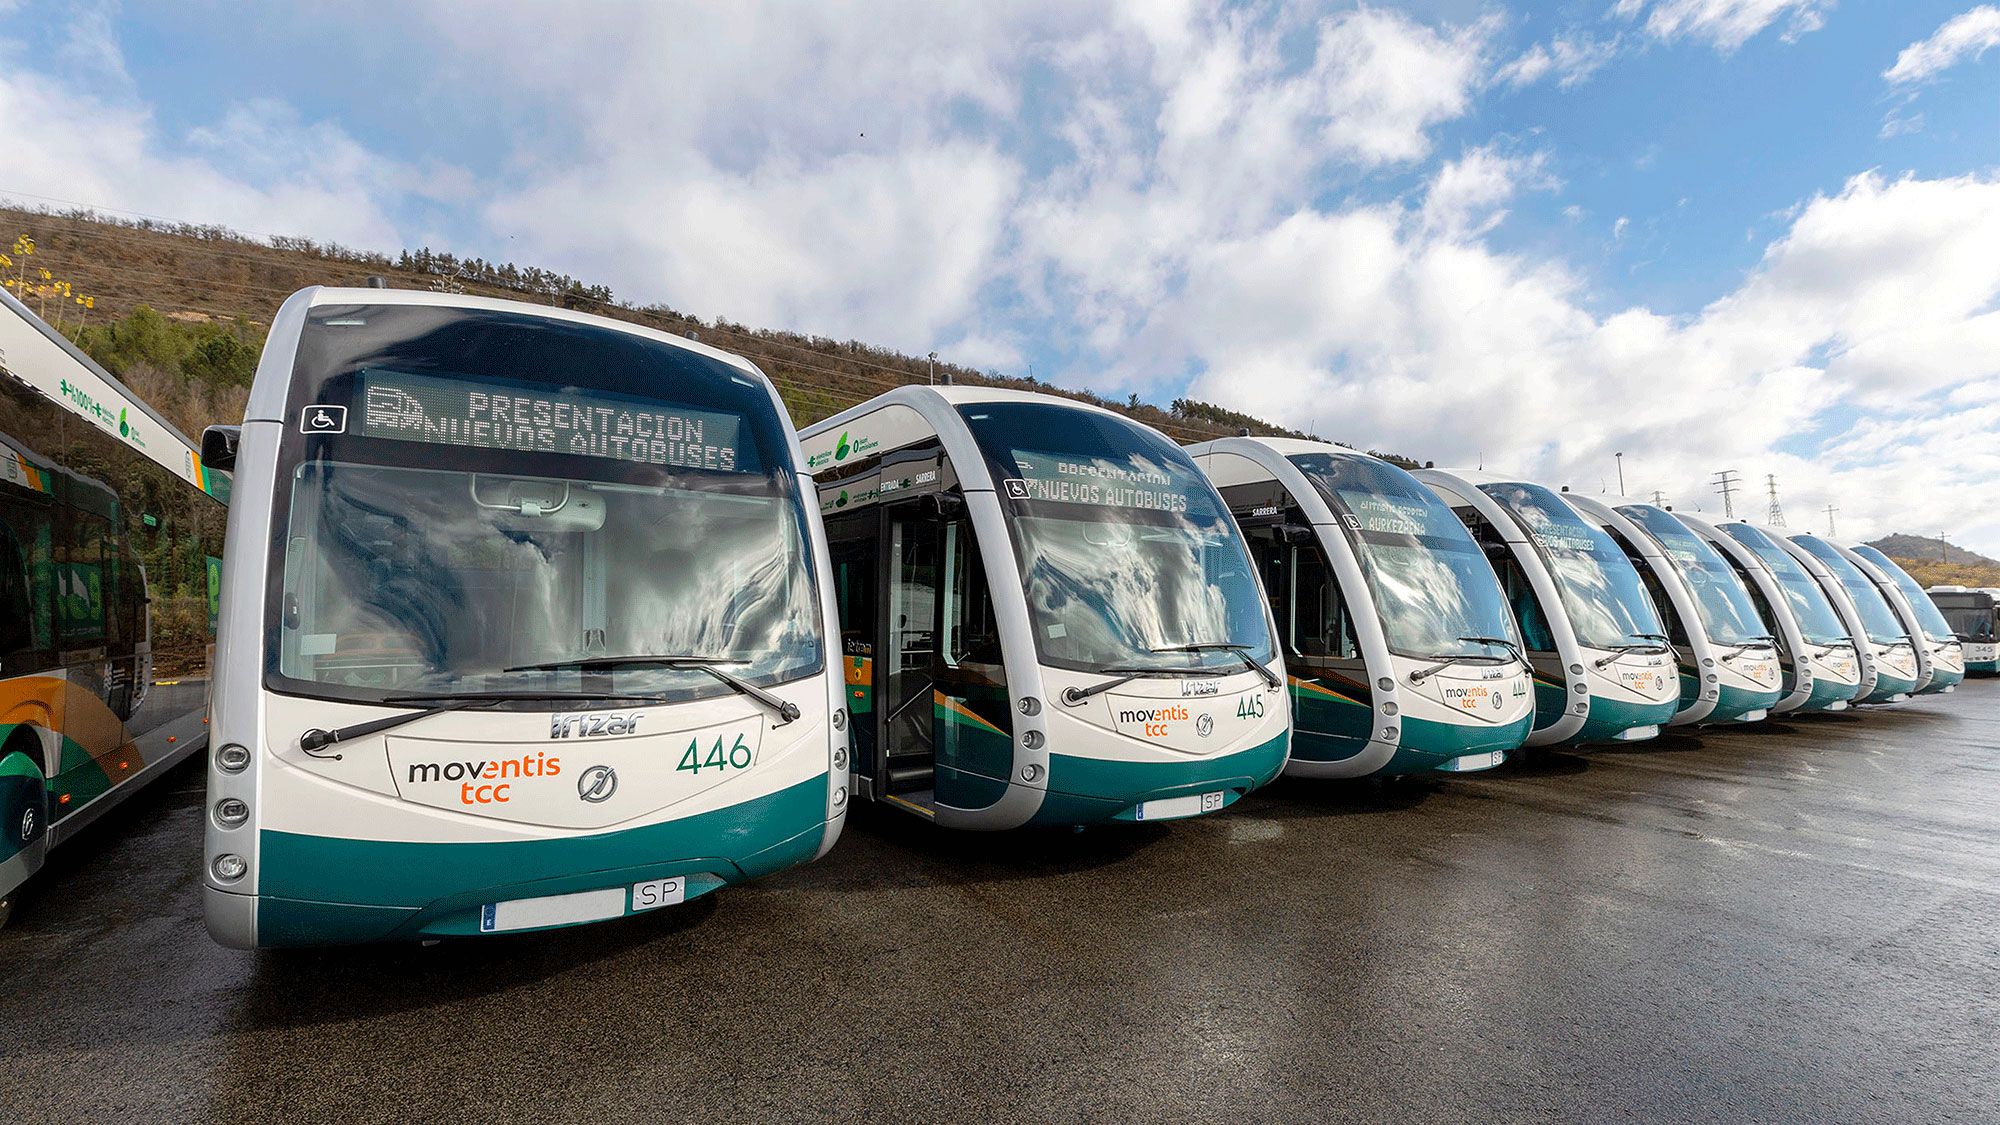 Presentation of another 9 Irizar ie tram 100% electric buses added to the Transports Ciutat Comtal (TCC) fleet in Pamplona